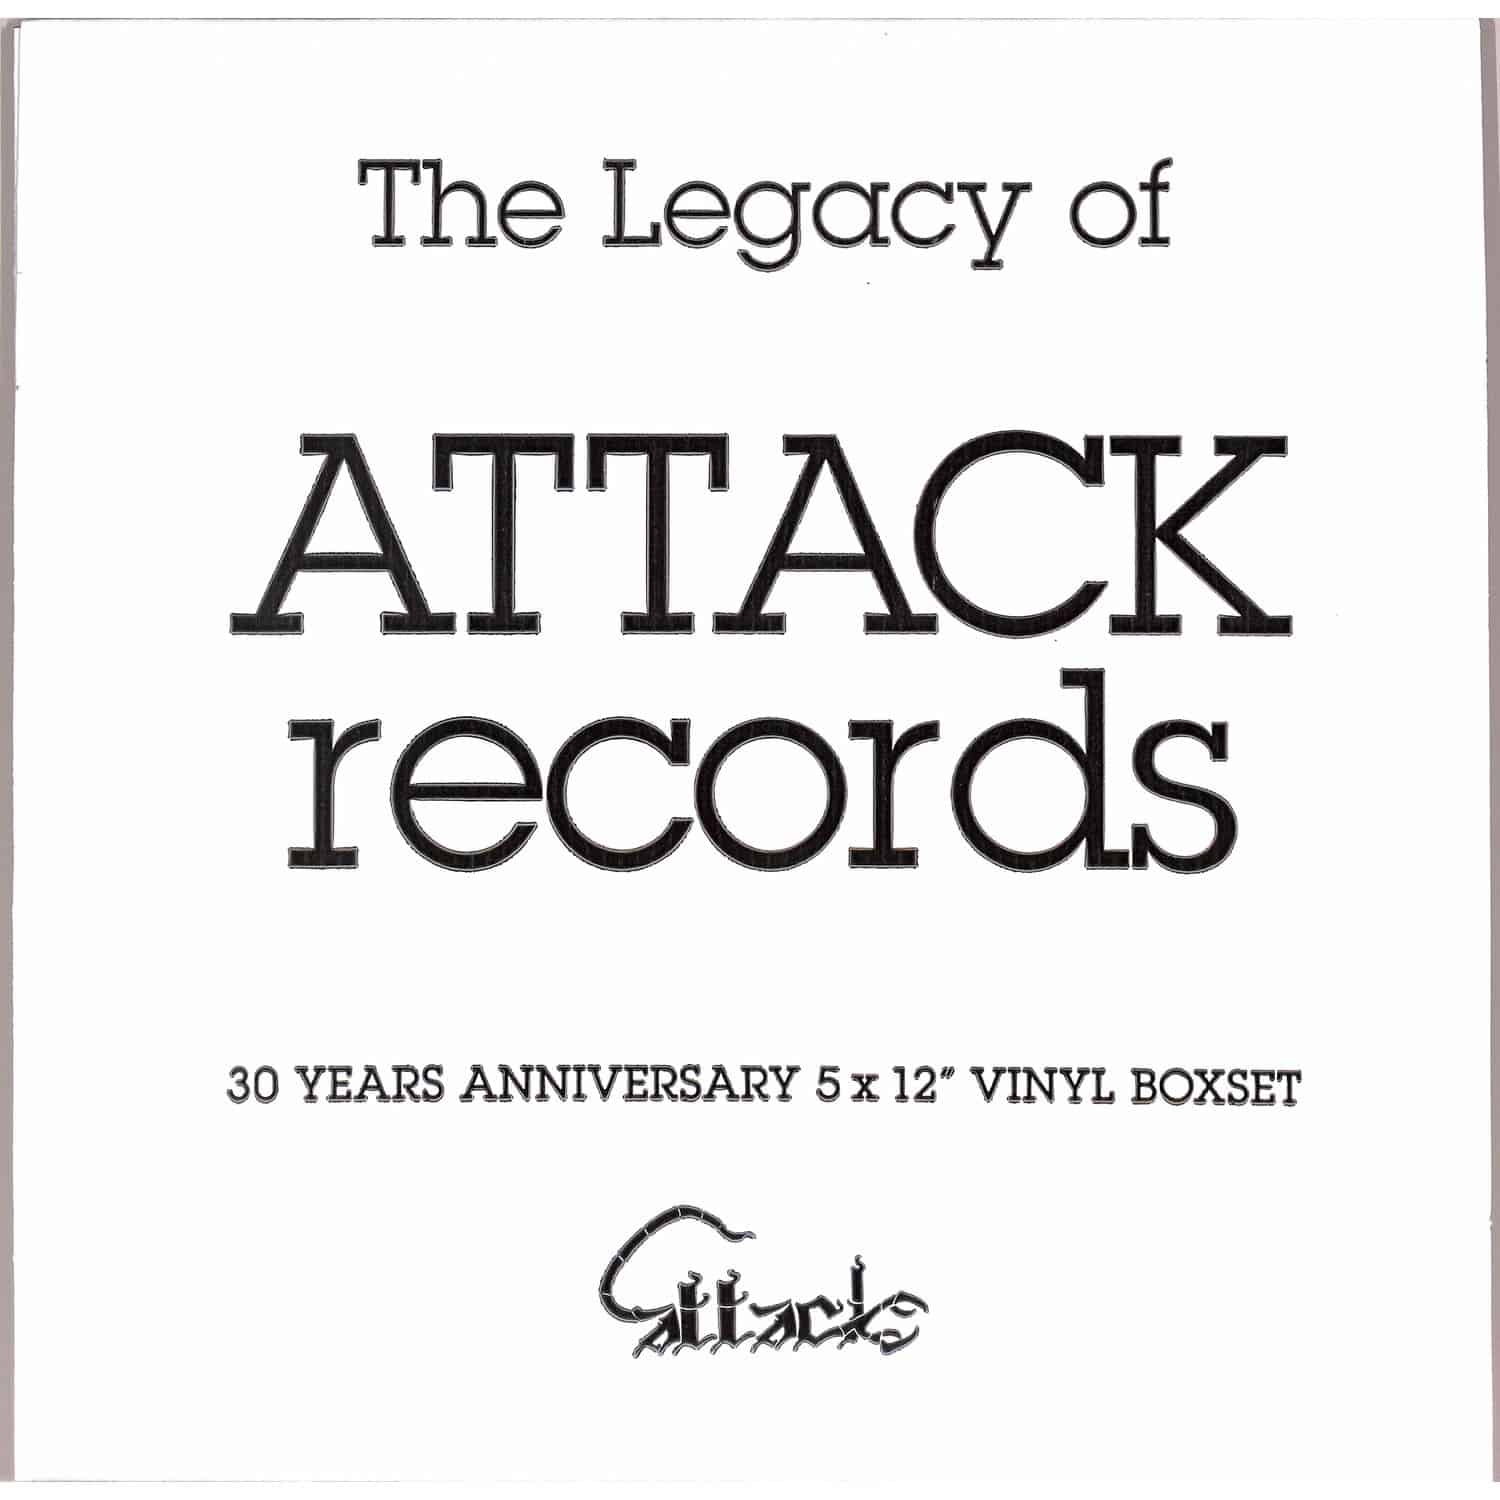 Emmanuel Top - THE LEGACY OF ATTACK RECORDS 